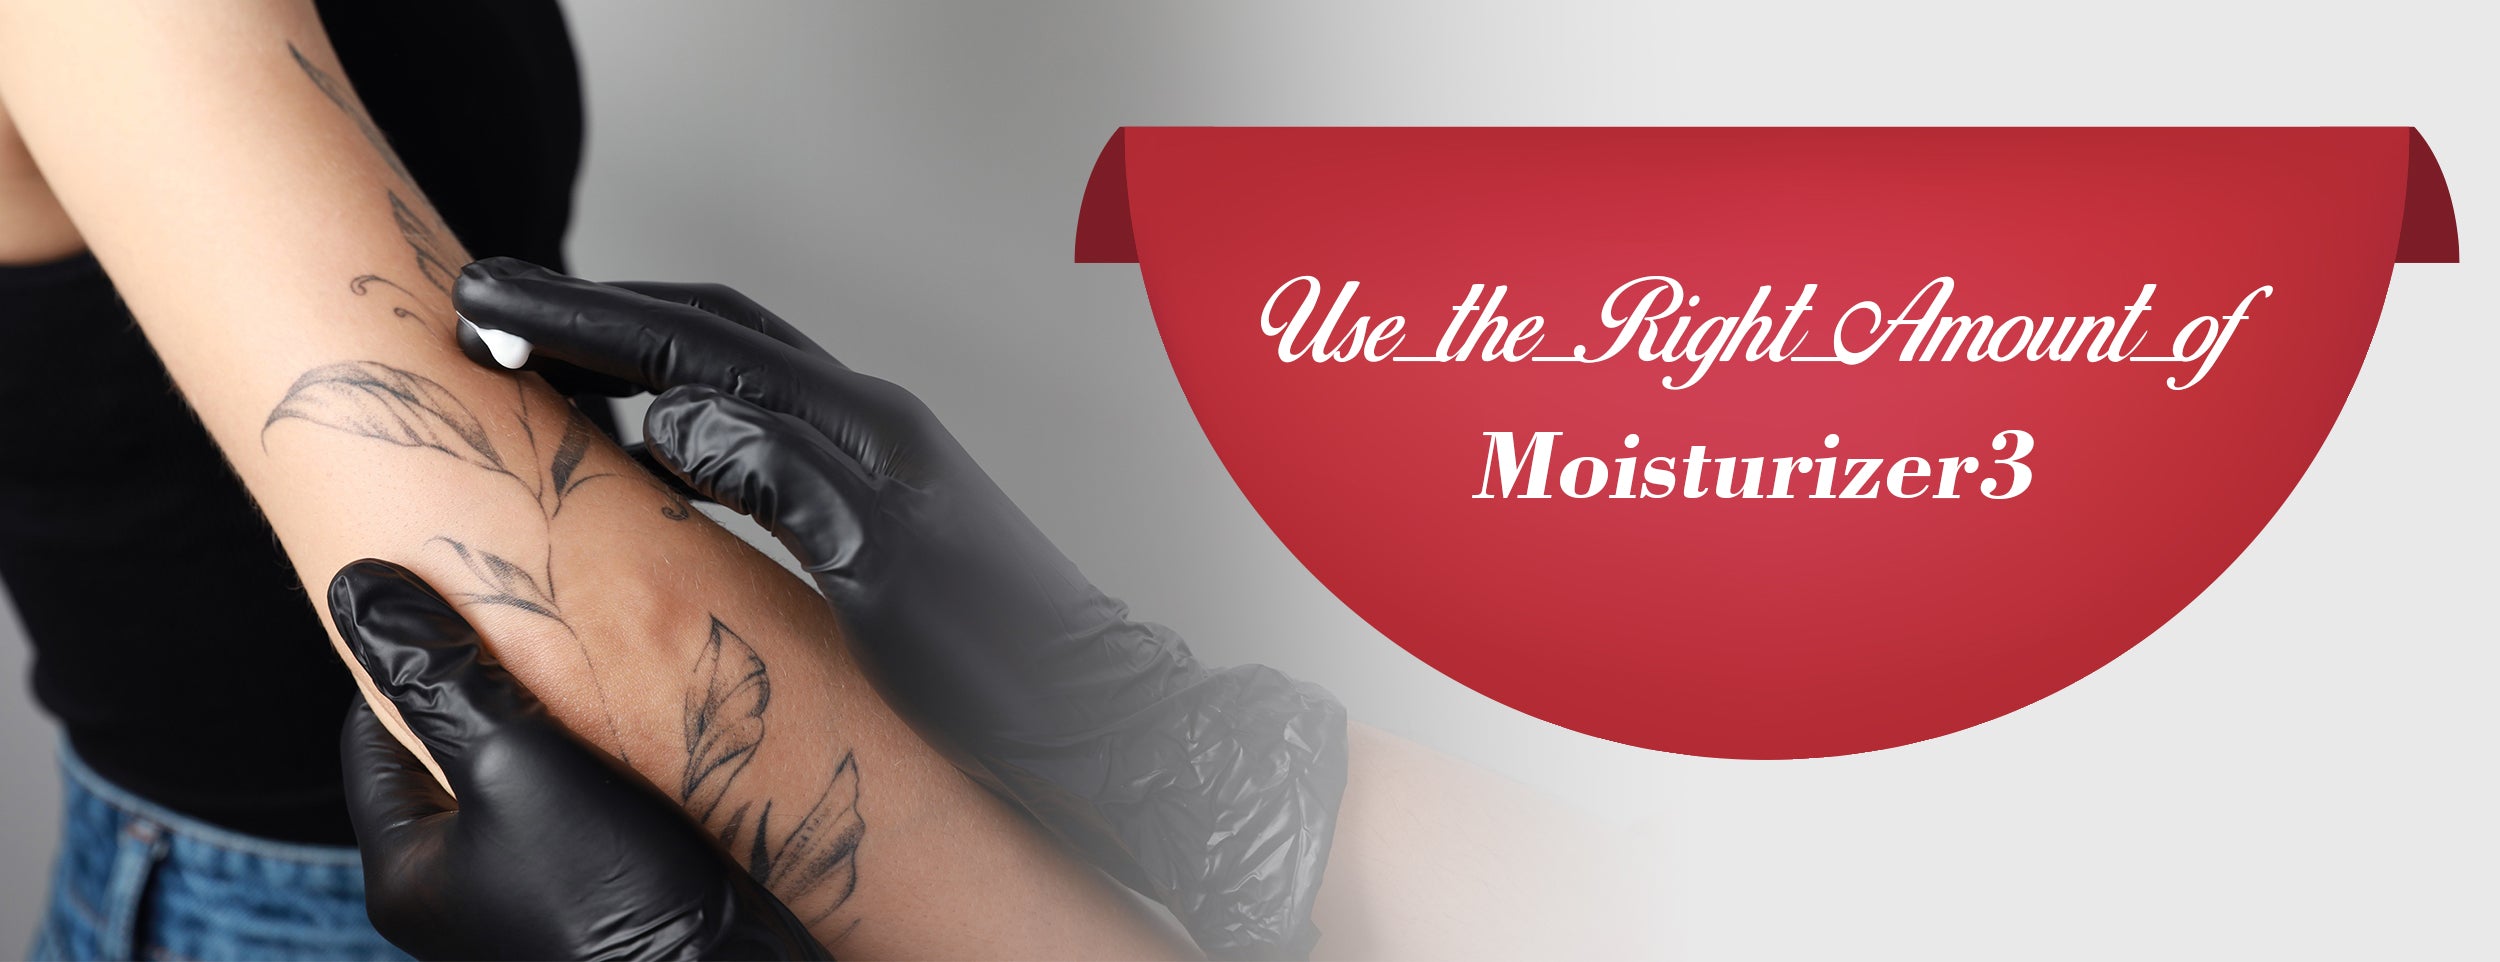 Use the Right Amount of Moisturizer for Faster Tattoo Healing